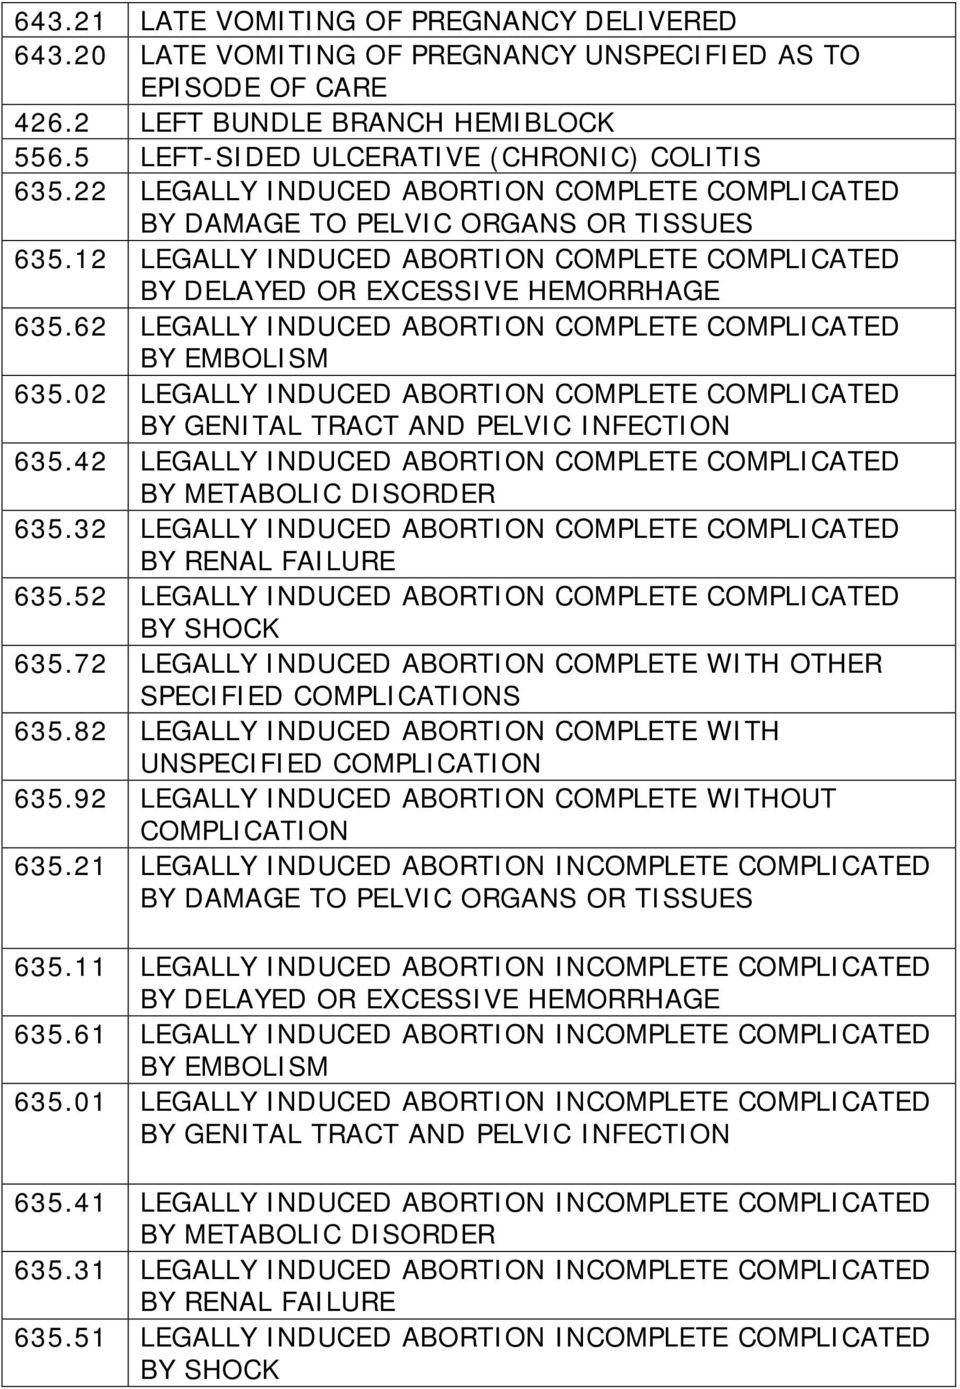 62 LEGALLY INDUCED ABORTION COMPLETE COMPLICATED BY EMBOLISM 635.02 LEGALLY INDUCED ABORTION COMPLETE COMPLICATED BY GENITAL TRACT AND PELVIC INFECTION 635.